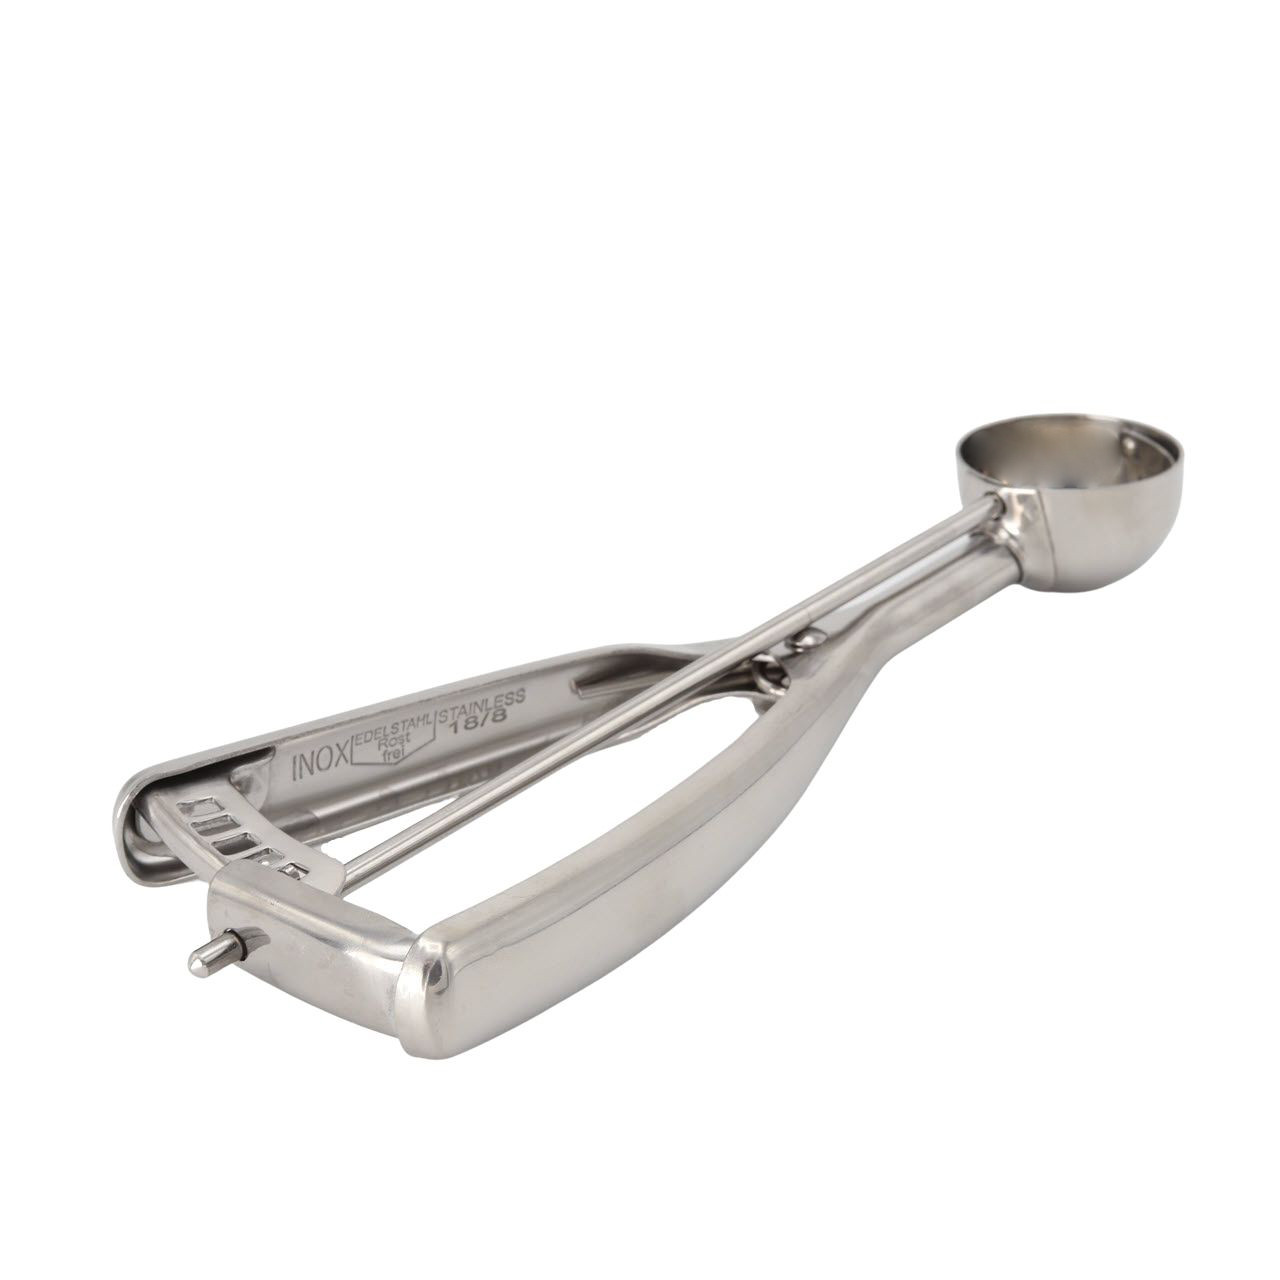 Fat Daddio's ProSeries Stainless Steel Scoop #60